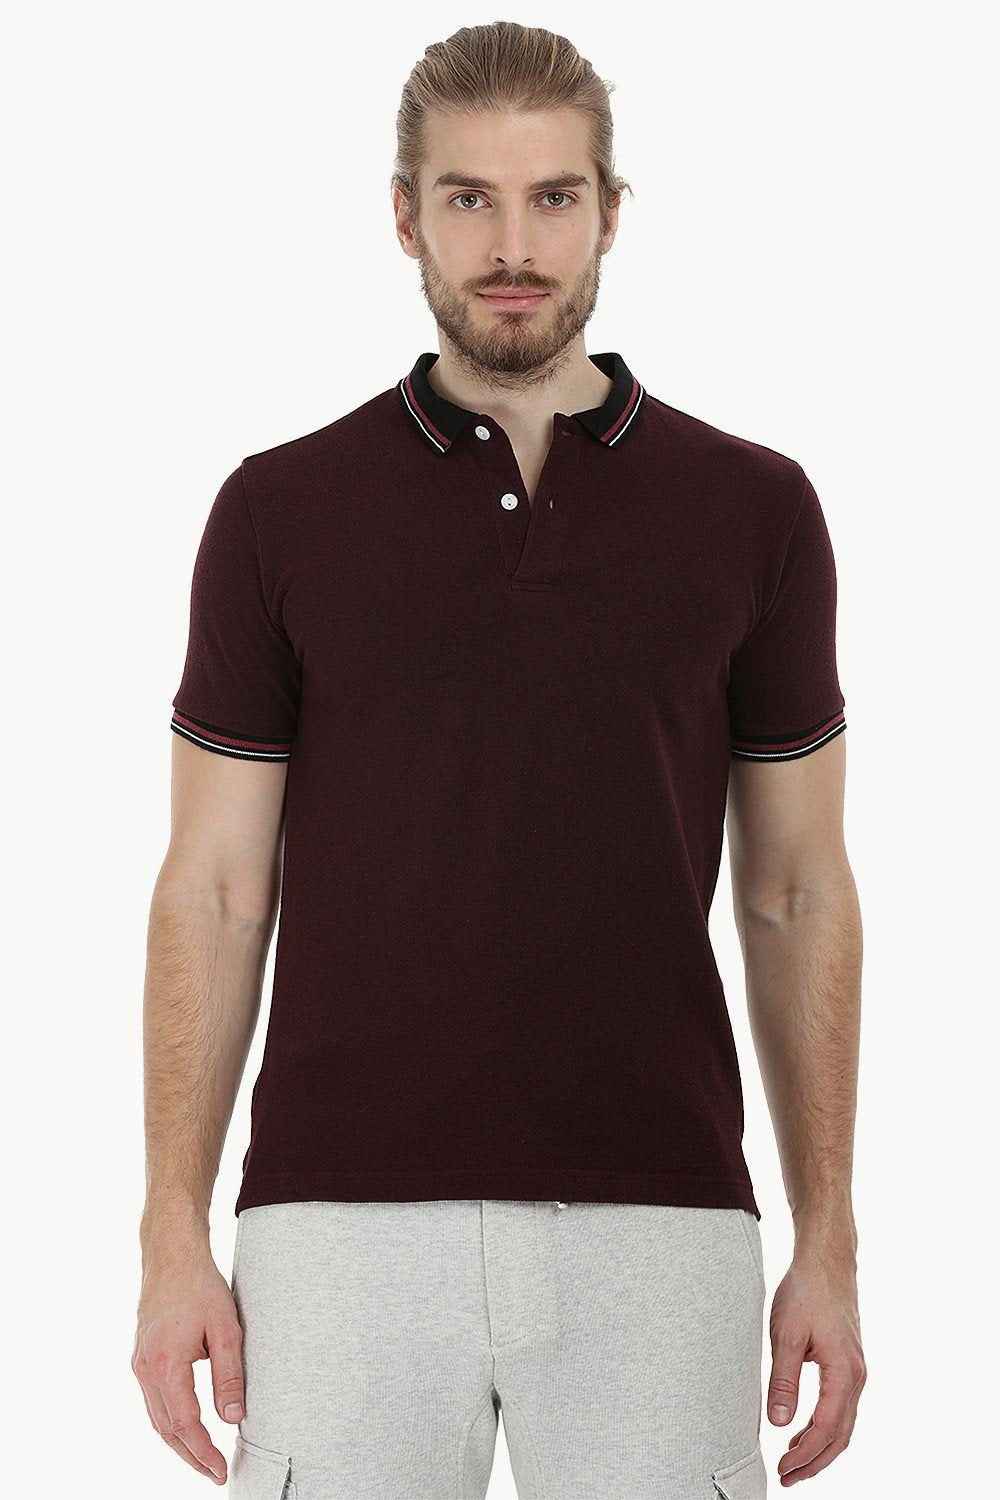 Buy polo t shirts for men online | Polo t shirts at best prices at Zobello